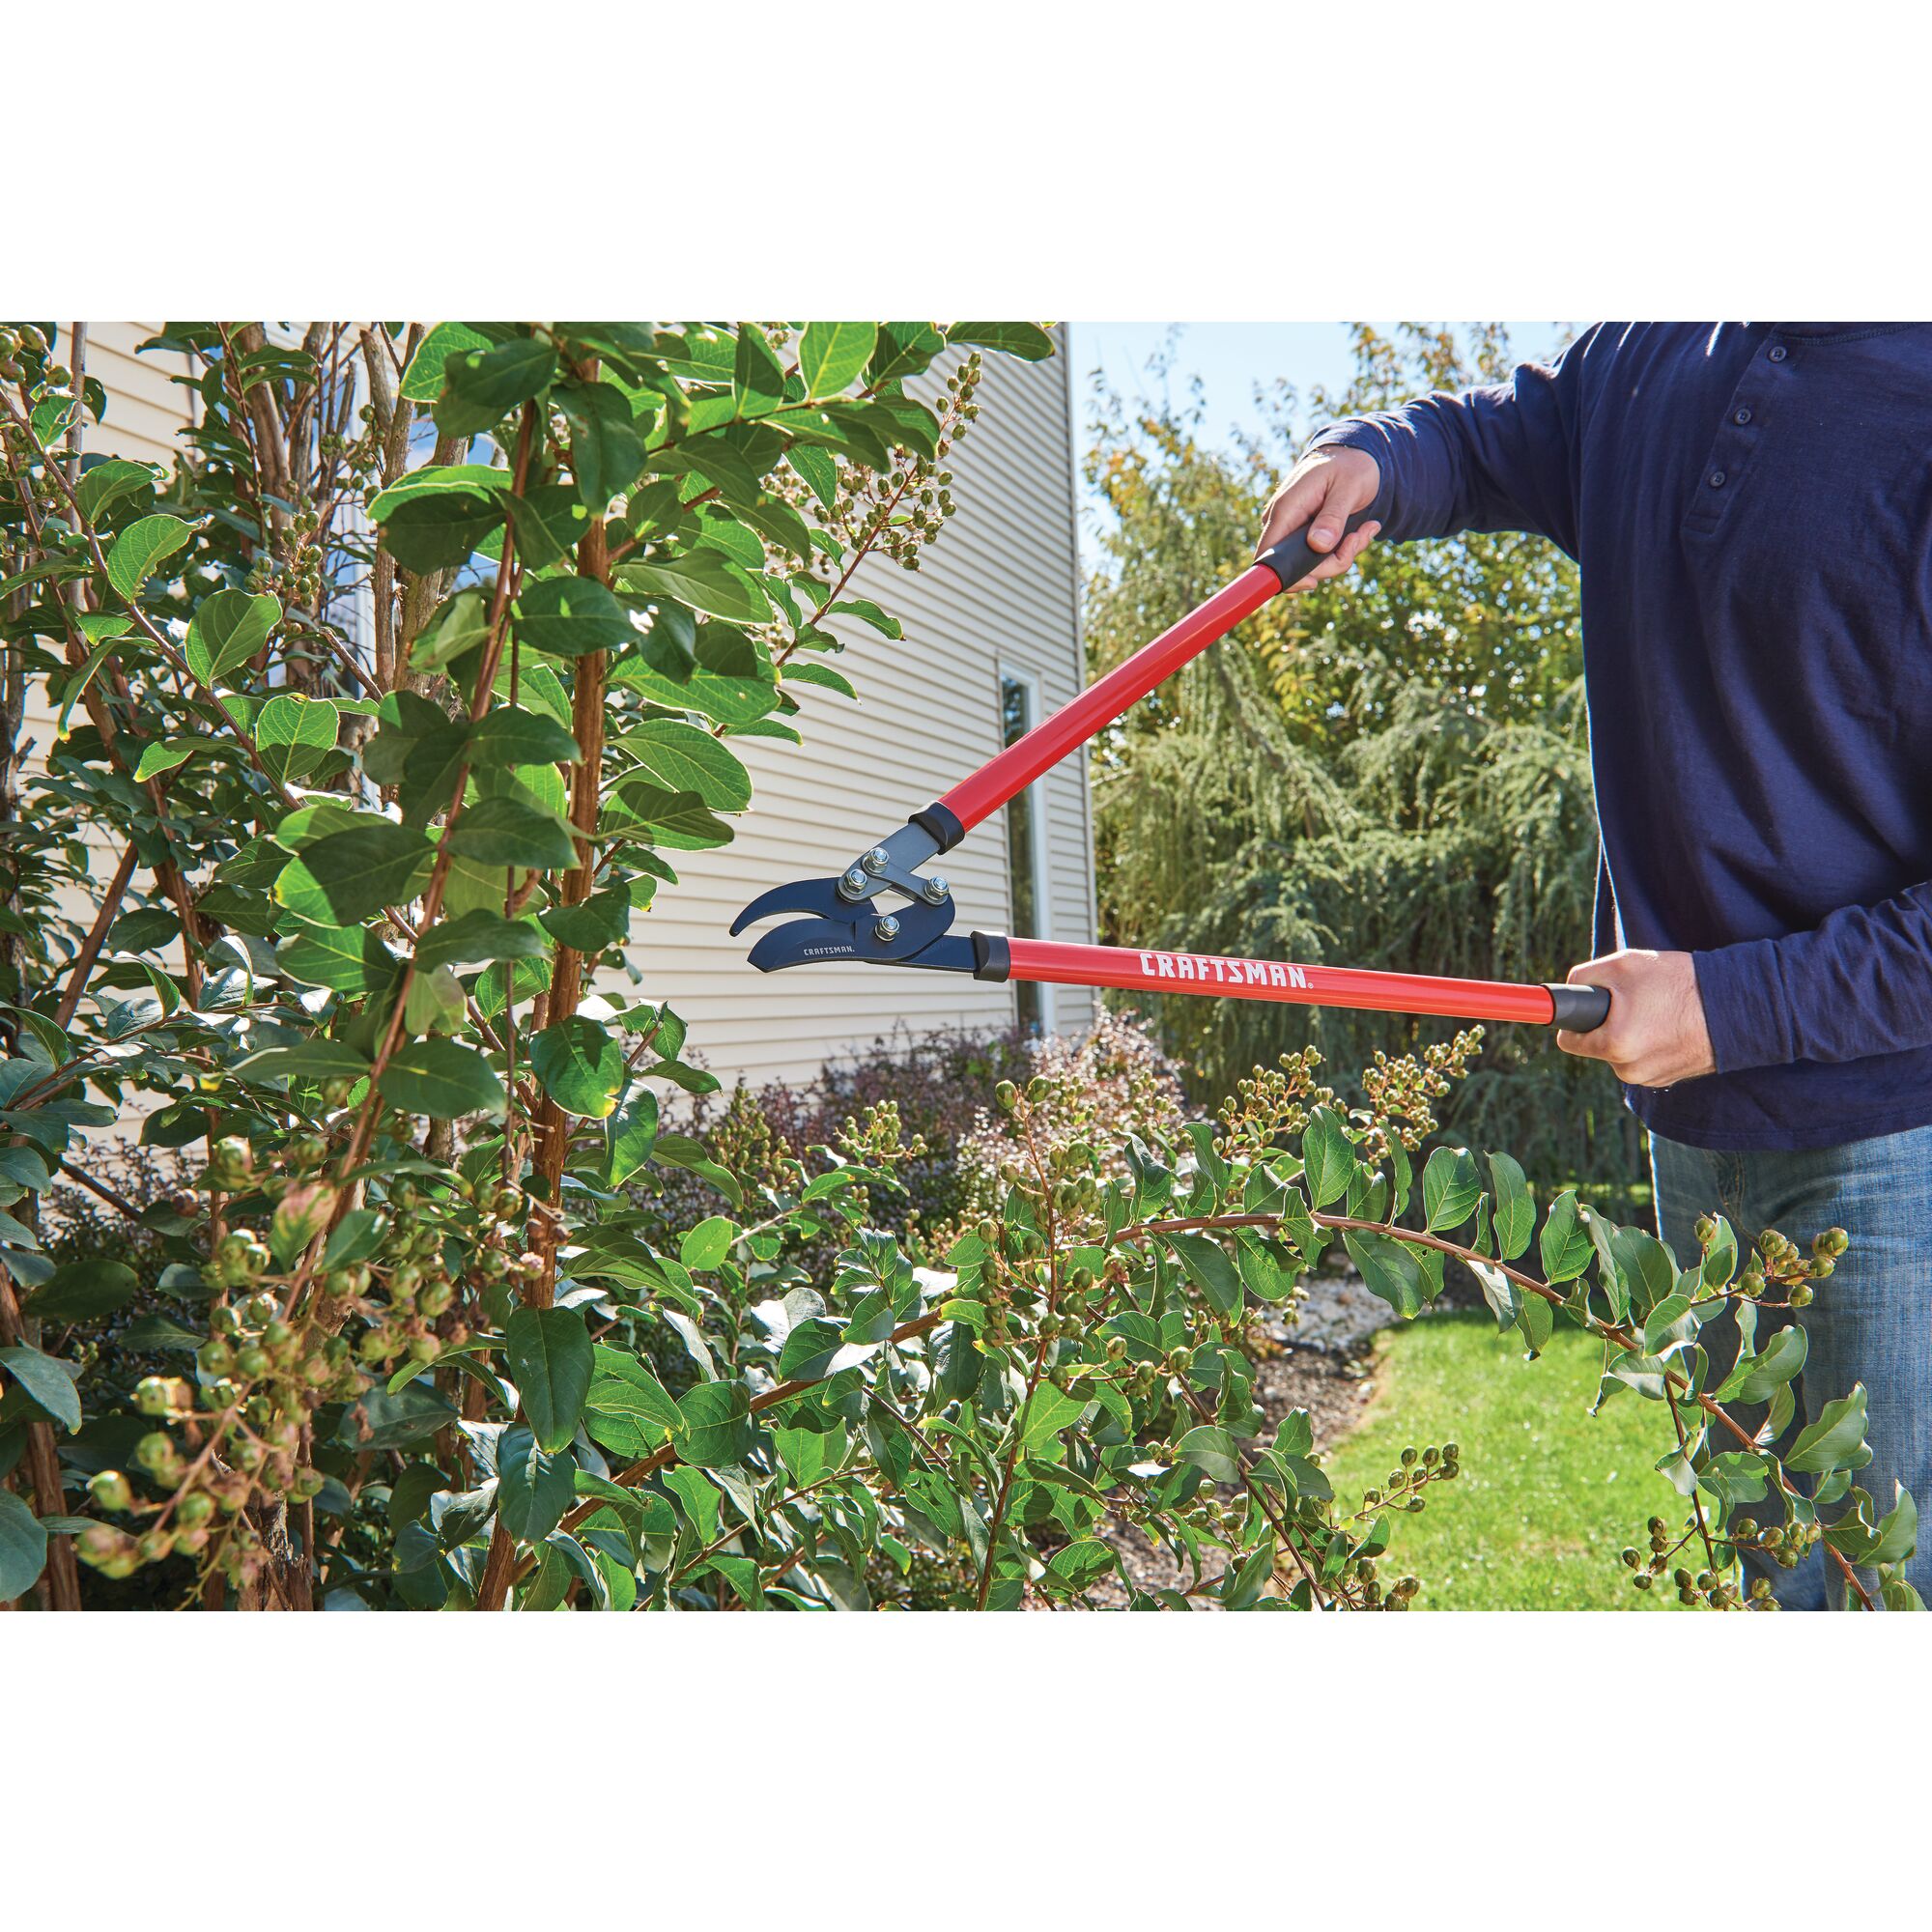 Compound bypass lopper being used by a person to cut a branch outdoors.